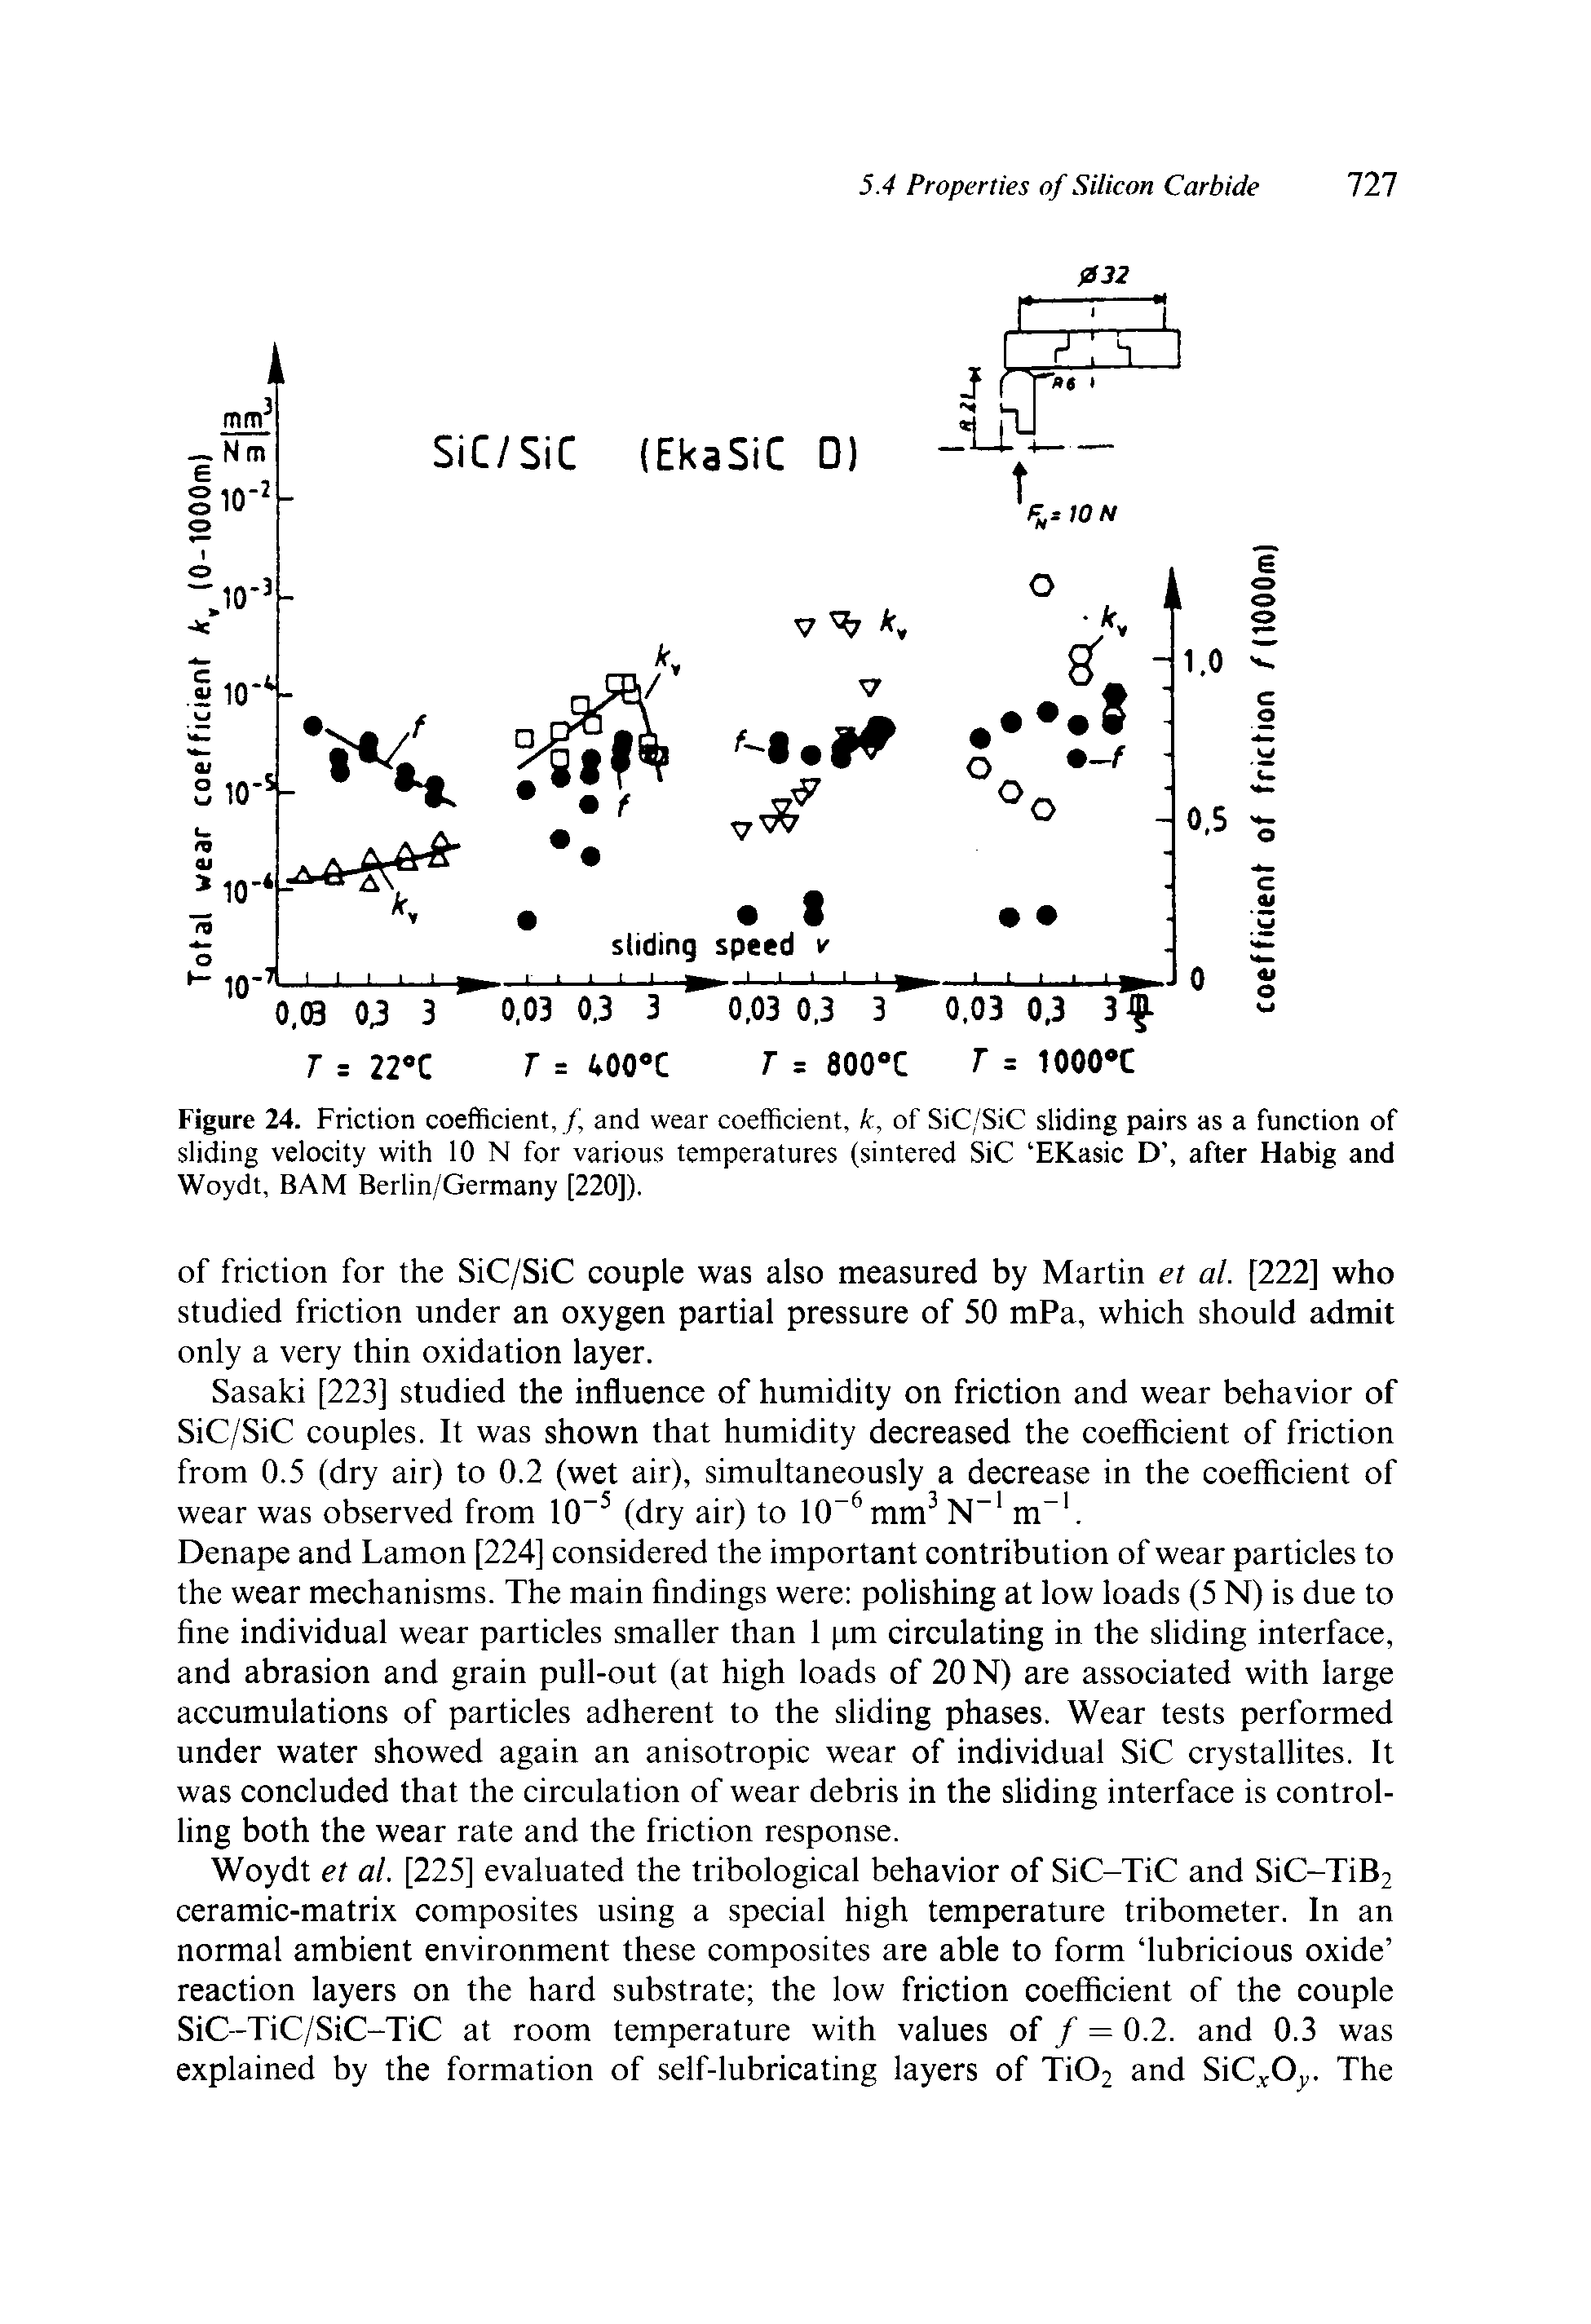 Figure 24. Friction coefficient, f, and wear coefficient, k, of SiC/SiC sliding pairs as a function of sliding velocity with 10 N for various temperatures (sintered SiC EKasic D , after Habig and Woydt, BAM Berlin/Germany [220]).